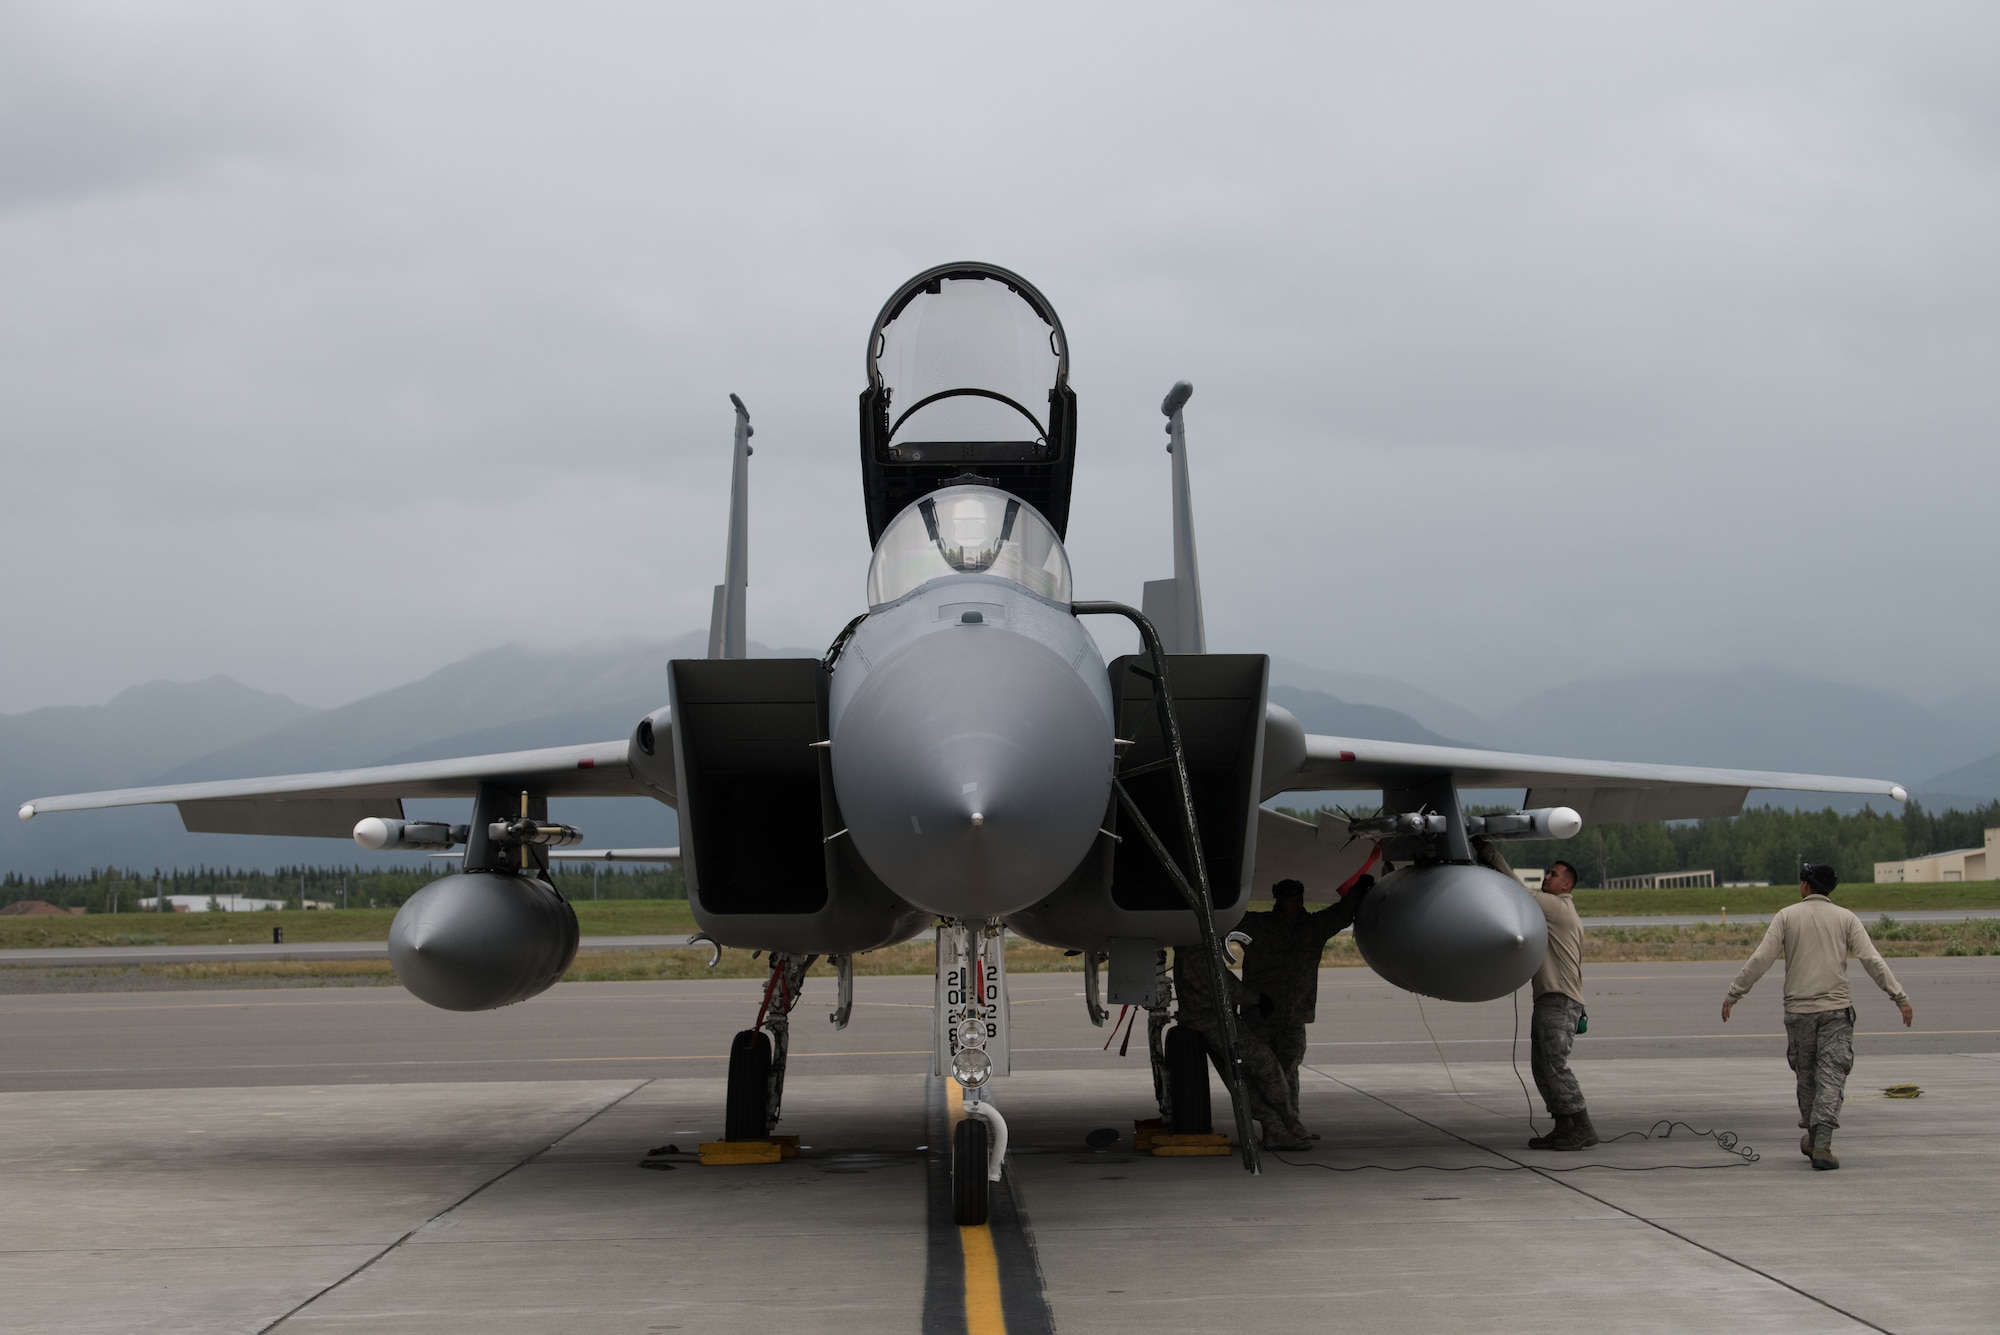 U.S. Air Force crew chiefs from the 144th Fighter Wing, Fresno Air National Guard Base, California, perform maintenance on an F-15C Eagle during Red Flag-Alaska 18-3 at Joint Base Elmendorf-Richardson, Alaska, Aug. 13, 2018. RF-A is a Pacific Air Forces-directed field training exercise for U.S. and international forces flown under simulated air combat conditions.